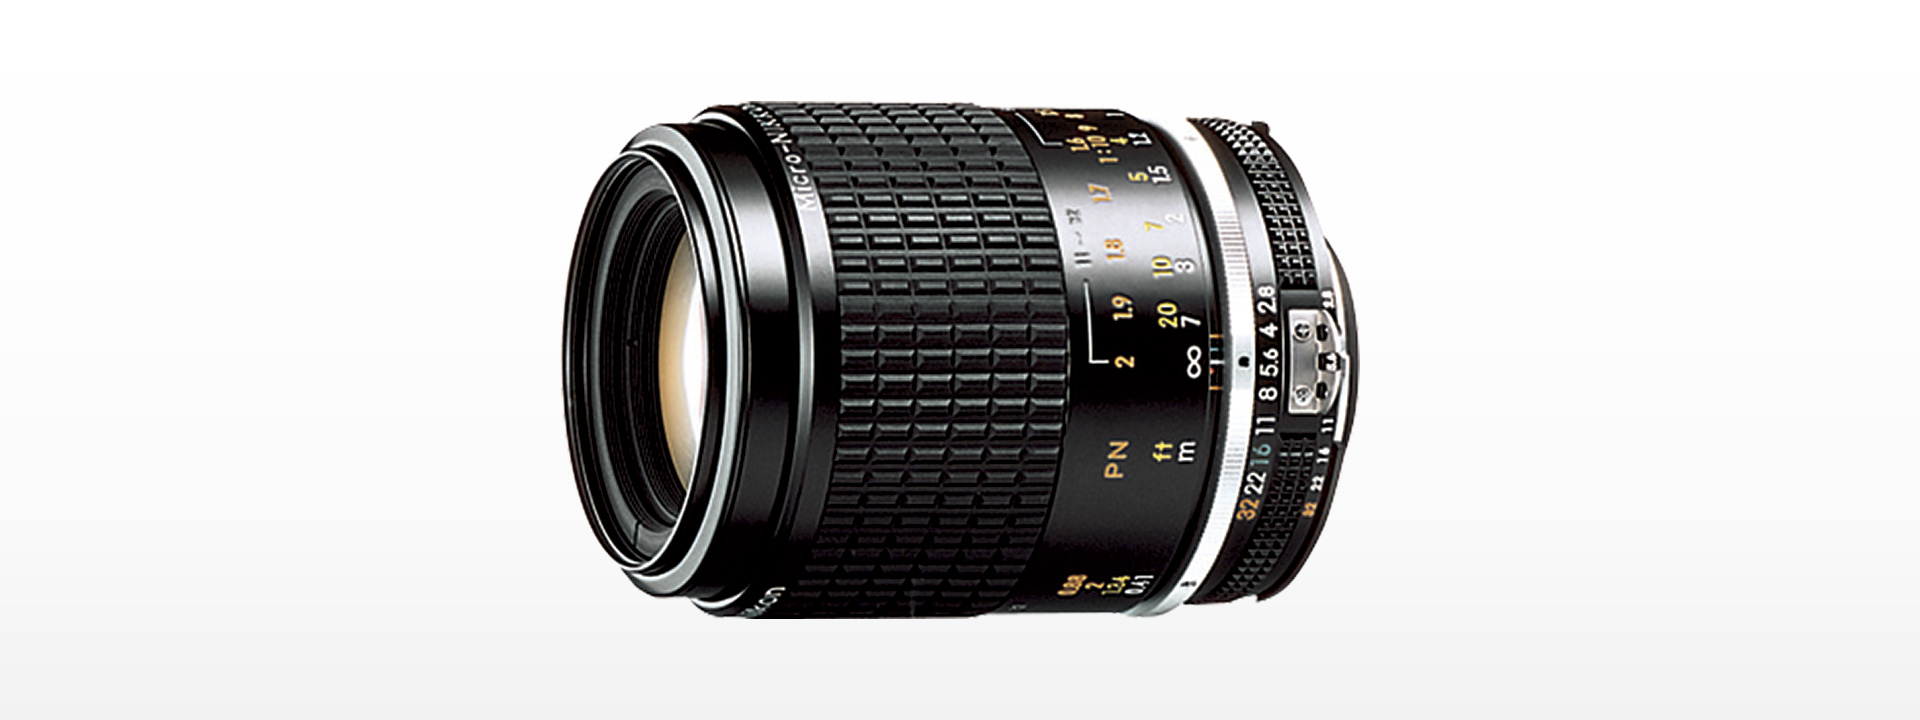 AI Nikkor 105mm F1.8S